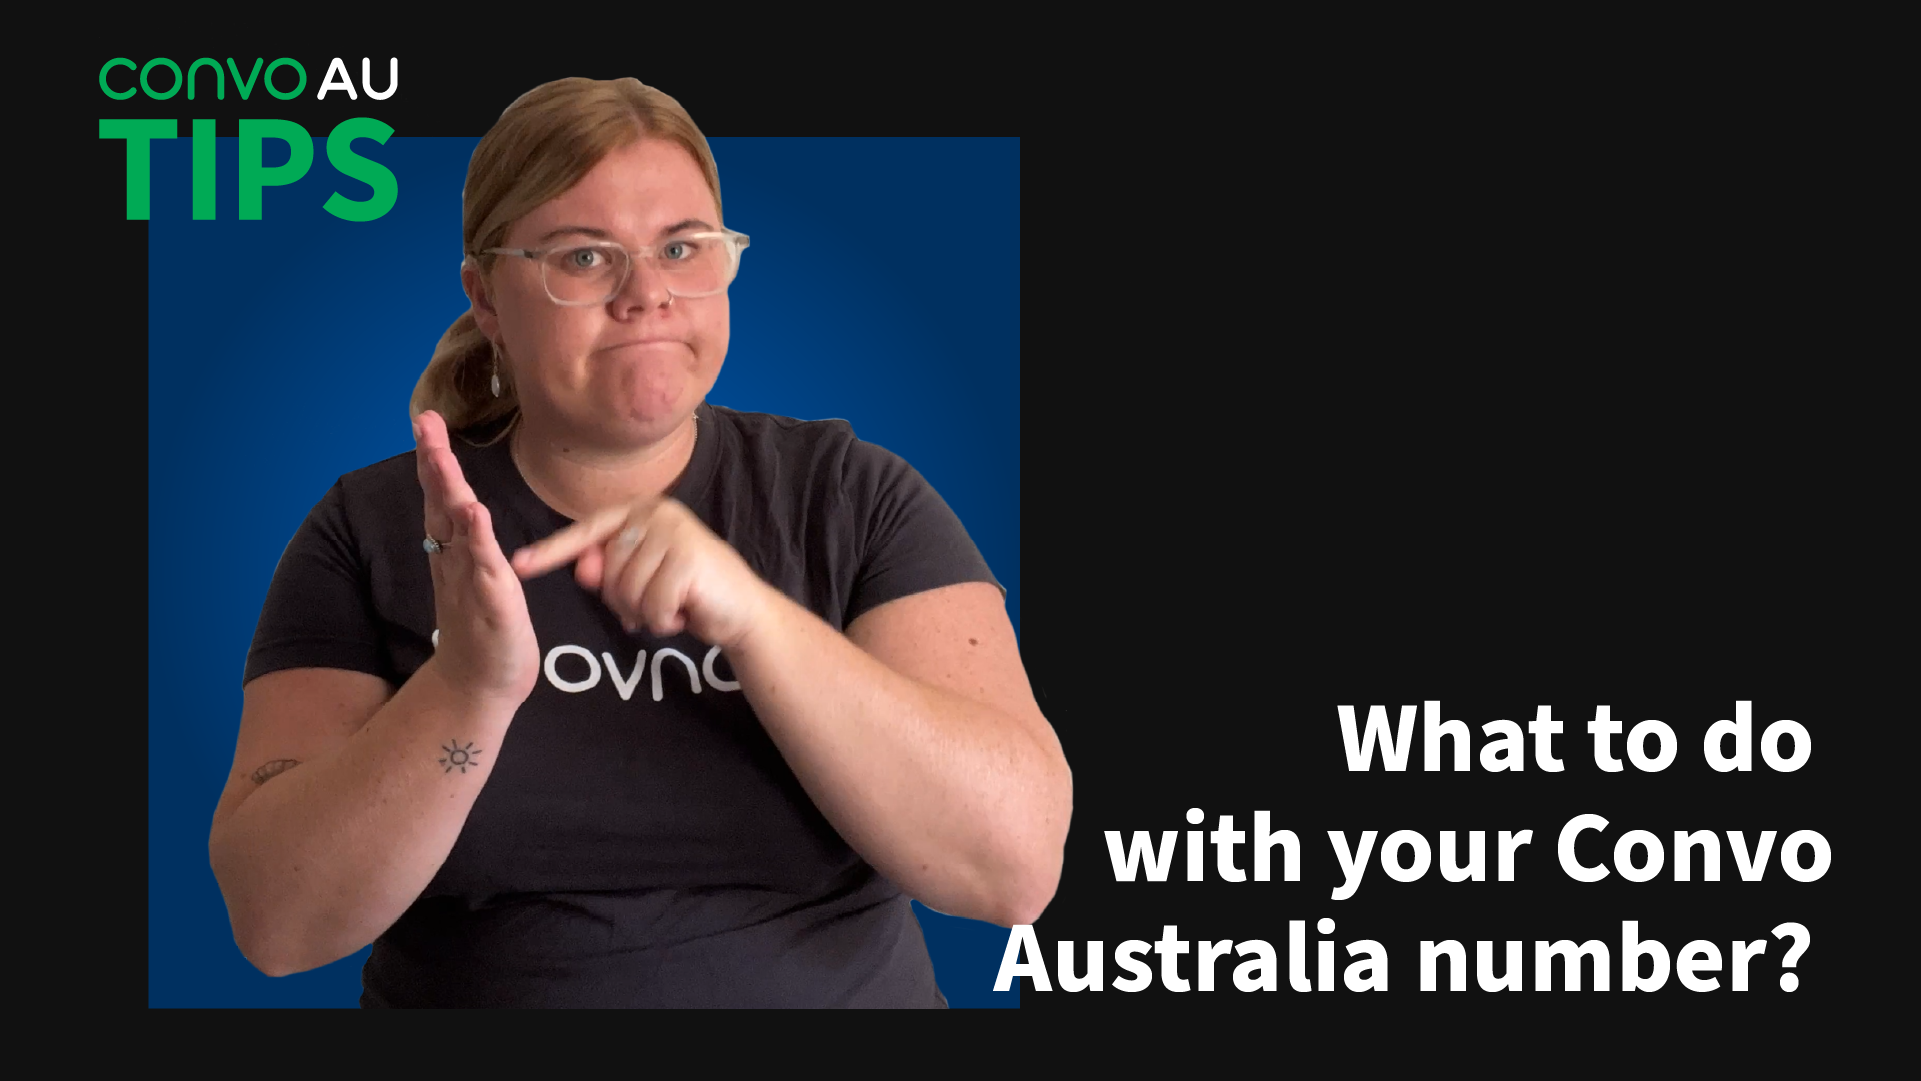 Tips: What to do with your Convo Australia number?